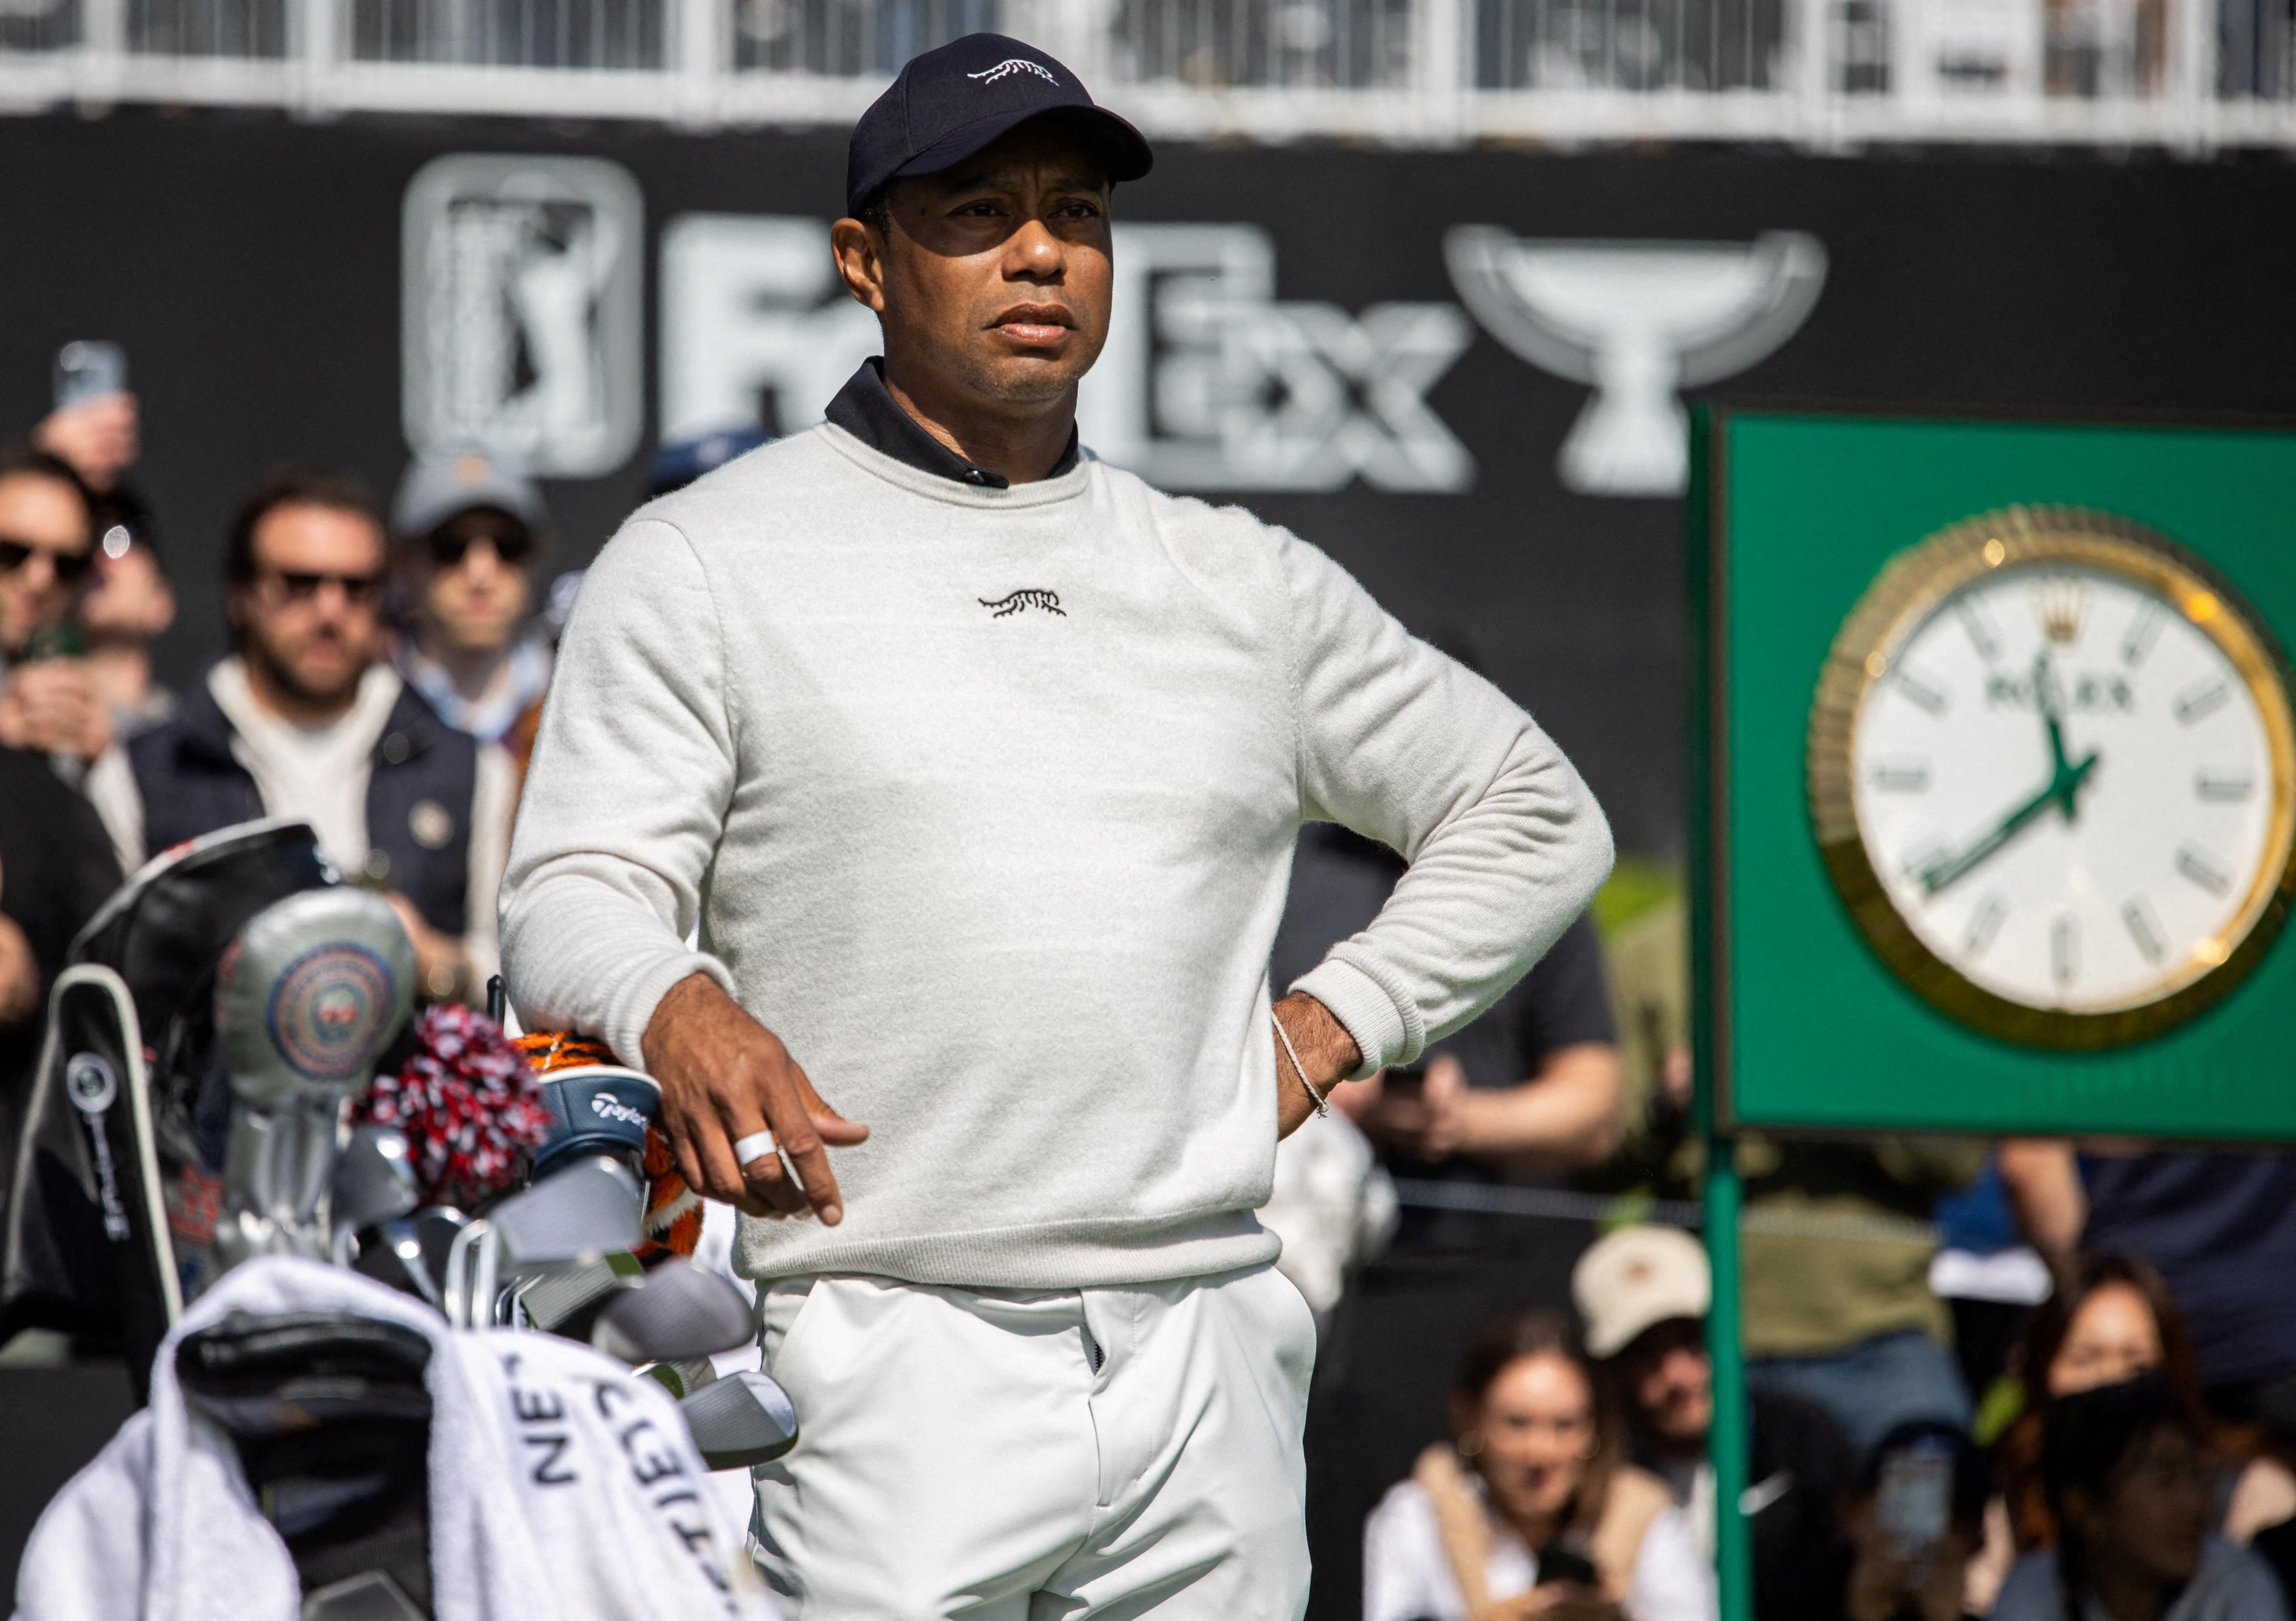 Notah Begay III: Tiger Woods has ‘zero mobility’ with ankle